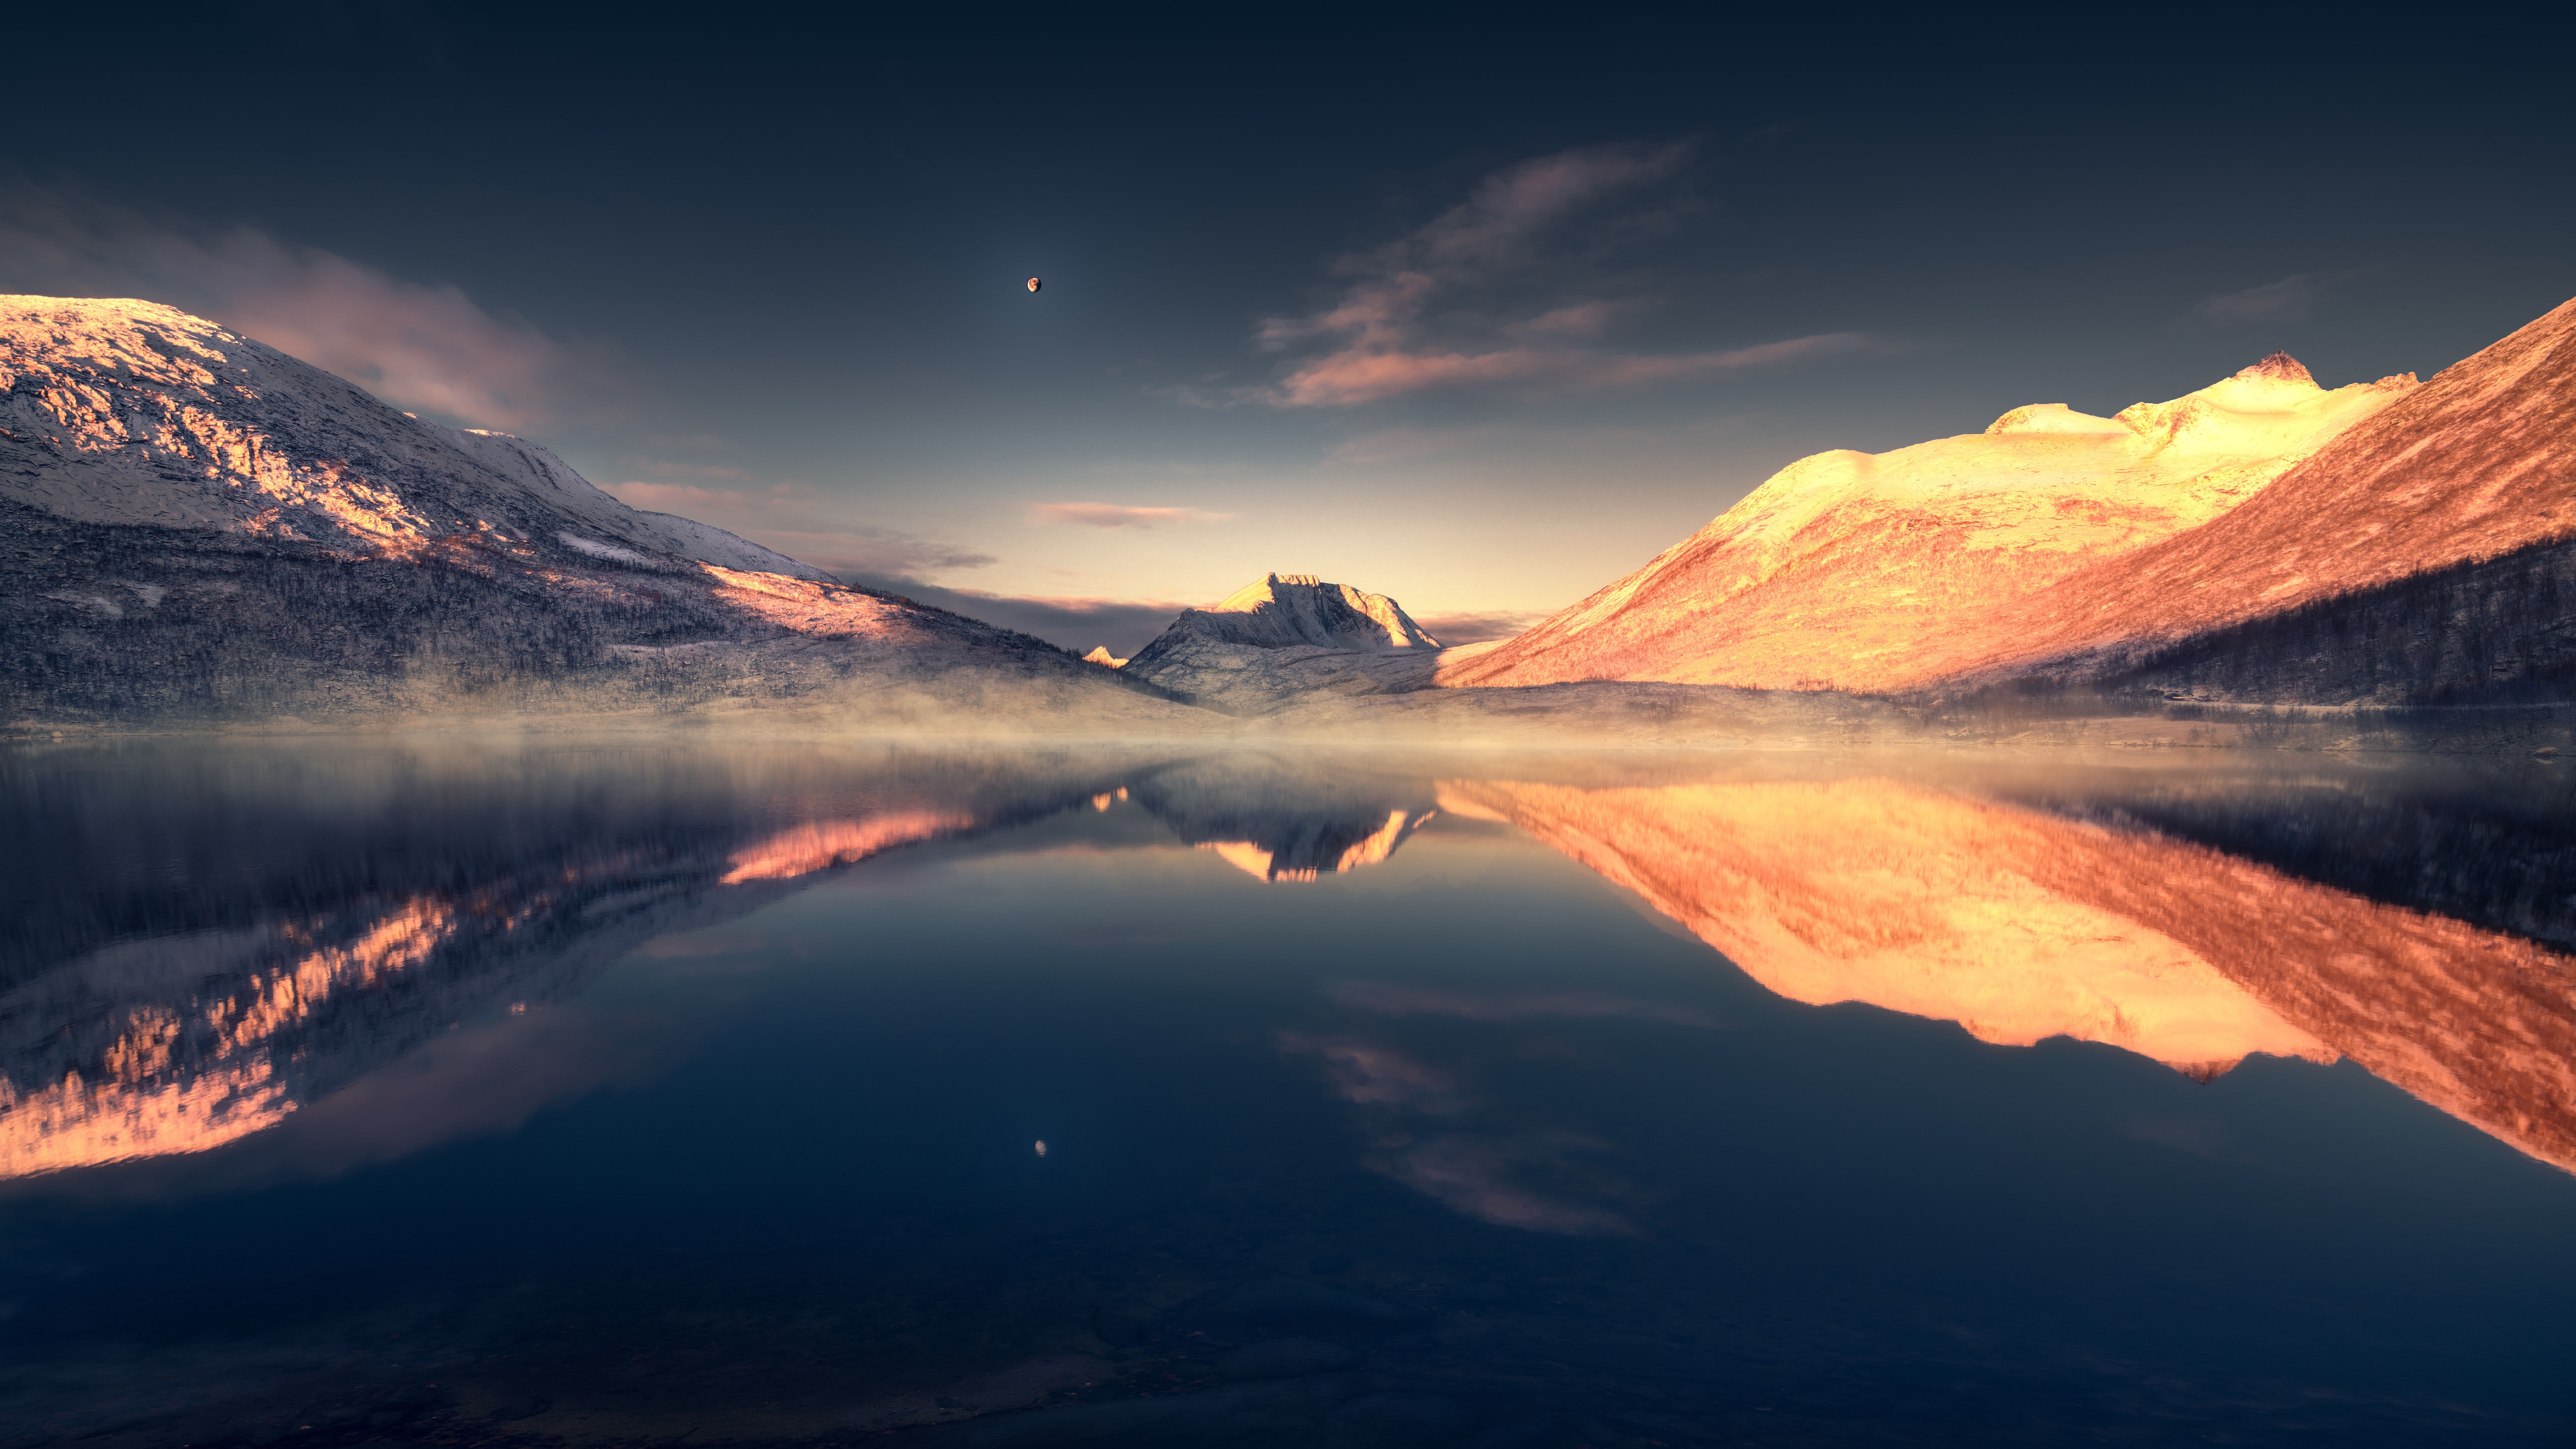 Mountains 4K Wallpaper, Lake, Evening, Reflection, Scenery, Tranquility, Moon, Landscape, Nature